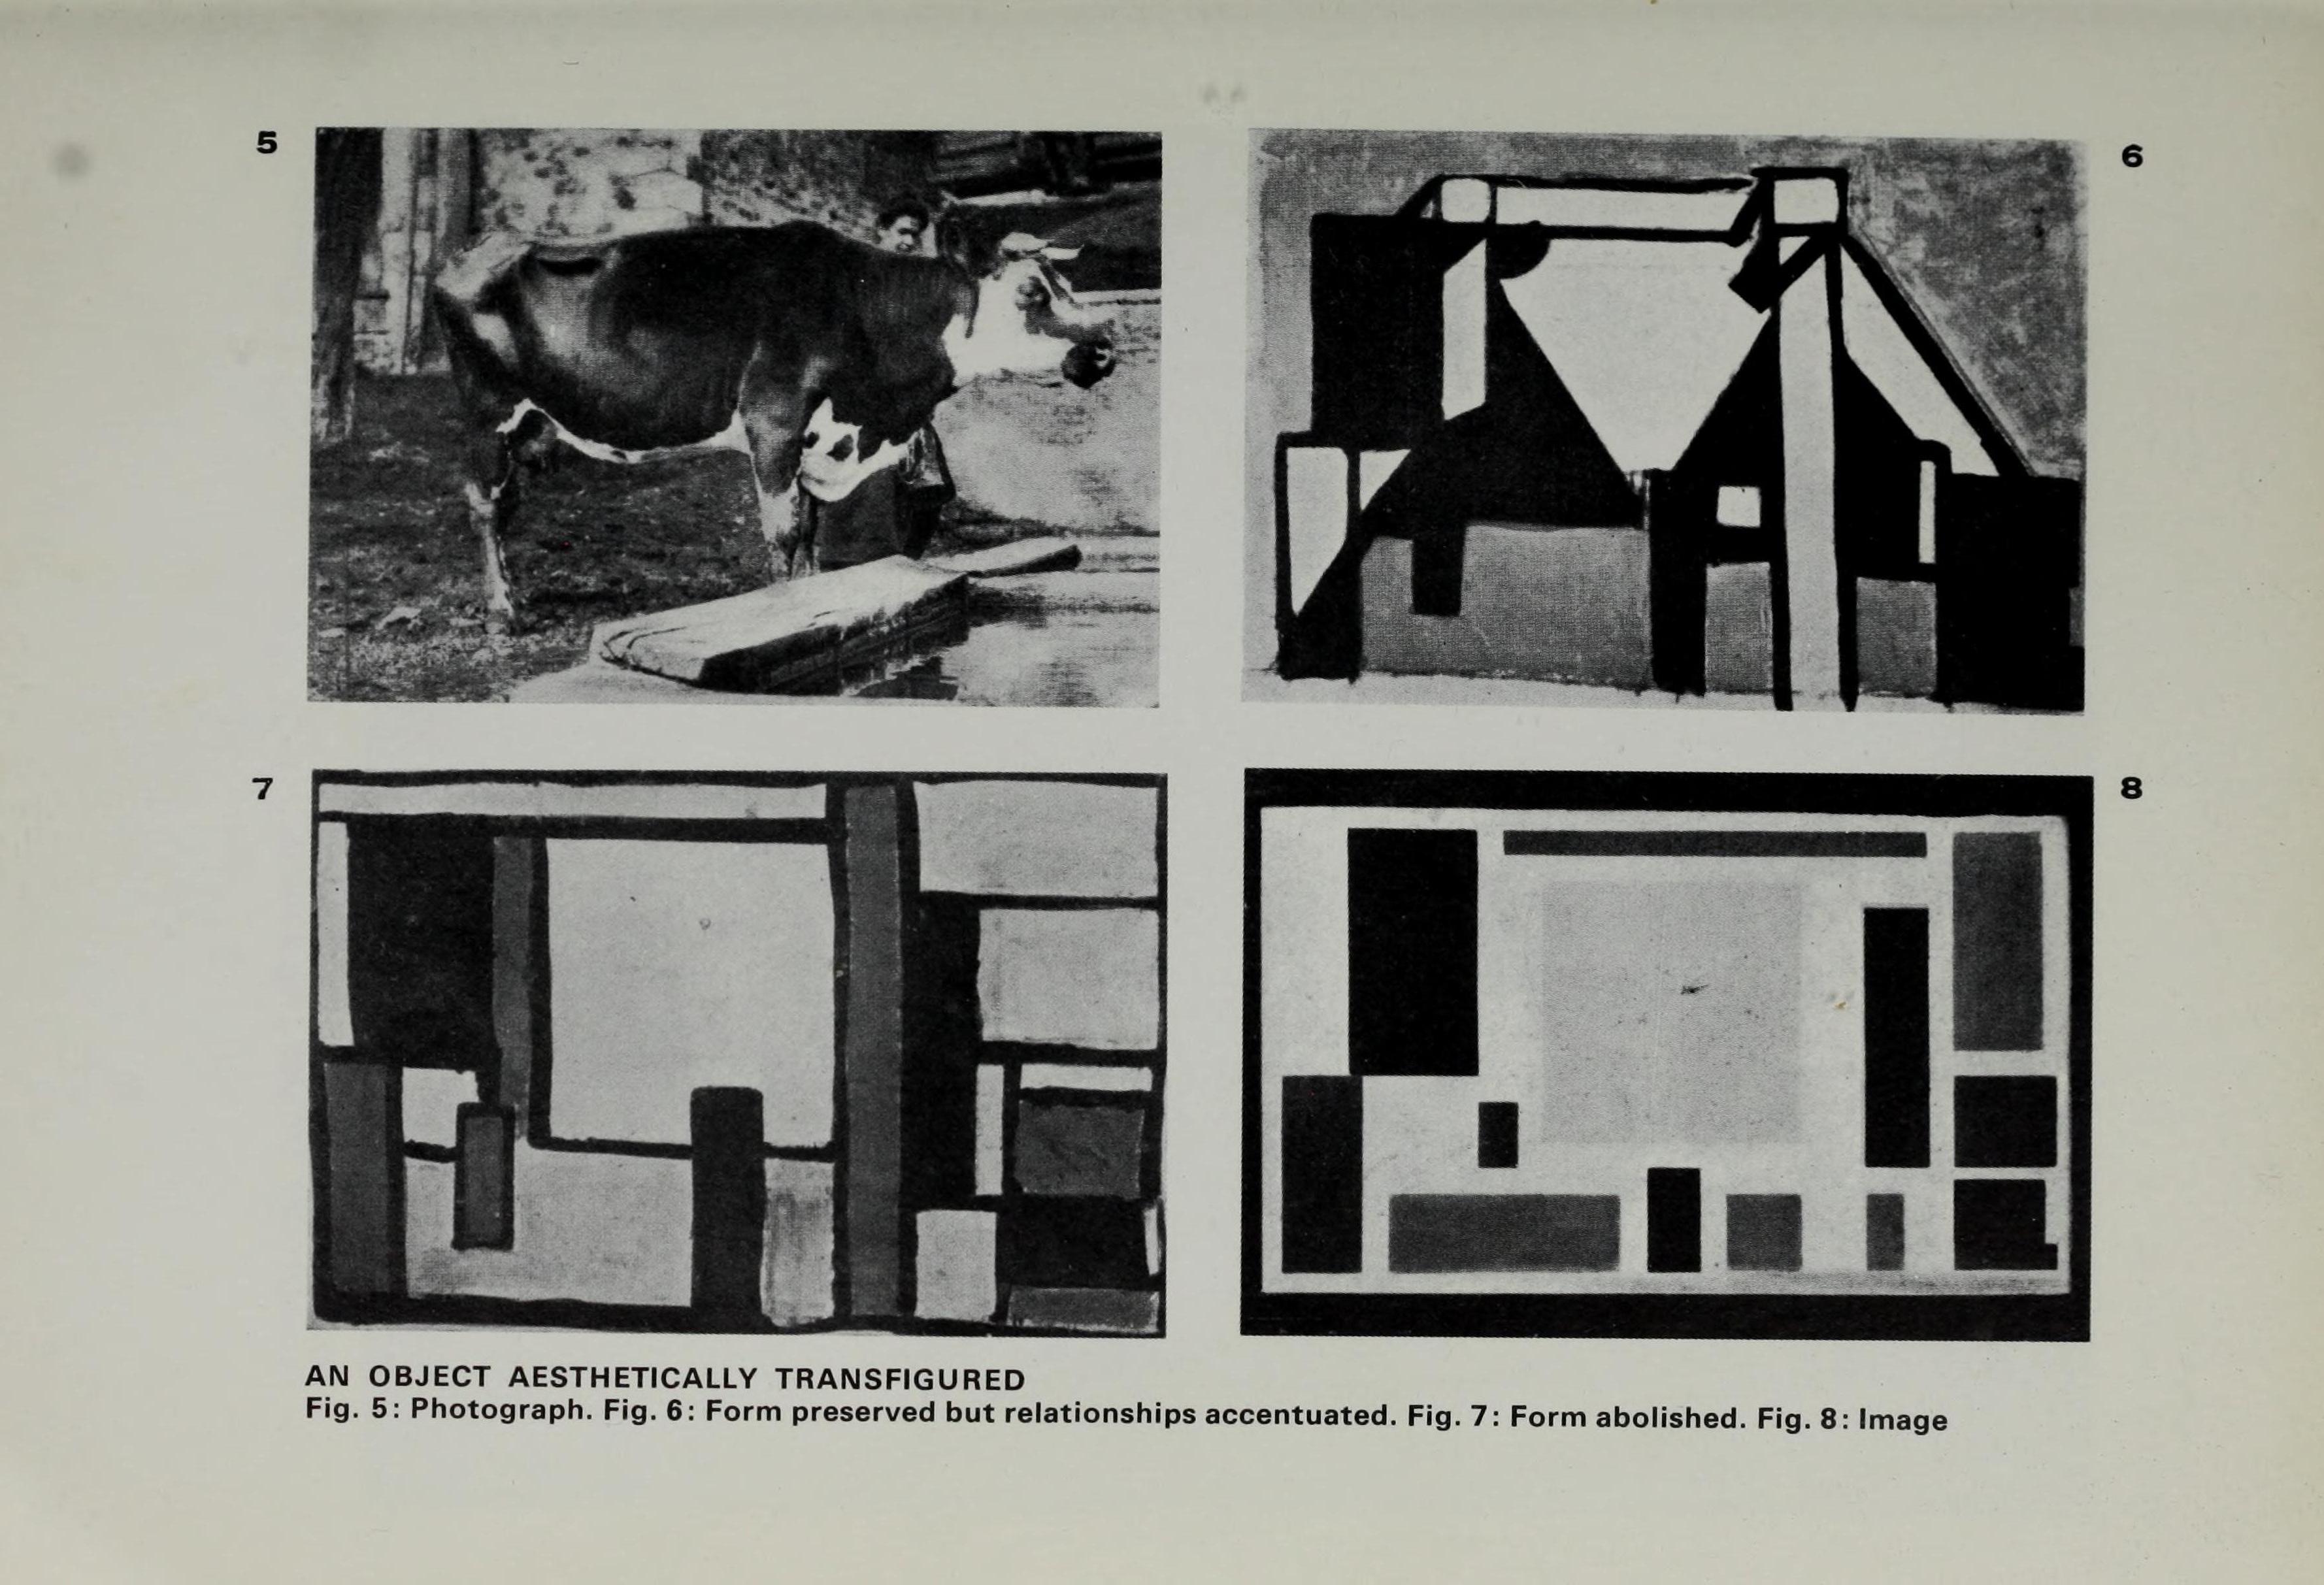 Principles of Neo-Plastic Art / Theo van Doesburg : with an introduction by Hans M. Wingler and a postscript by H. L. C. Jaffé ; translated from the German by Janet Seligman. — London : Percy Lund, Humphries & Co Ltd., 19​69